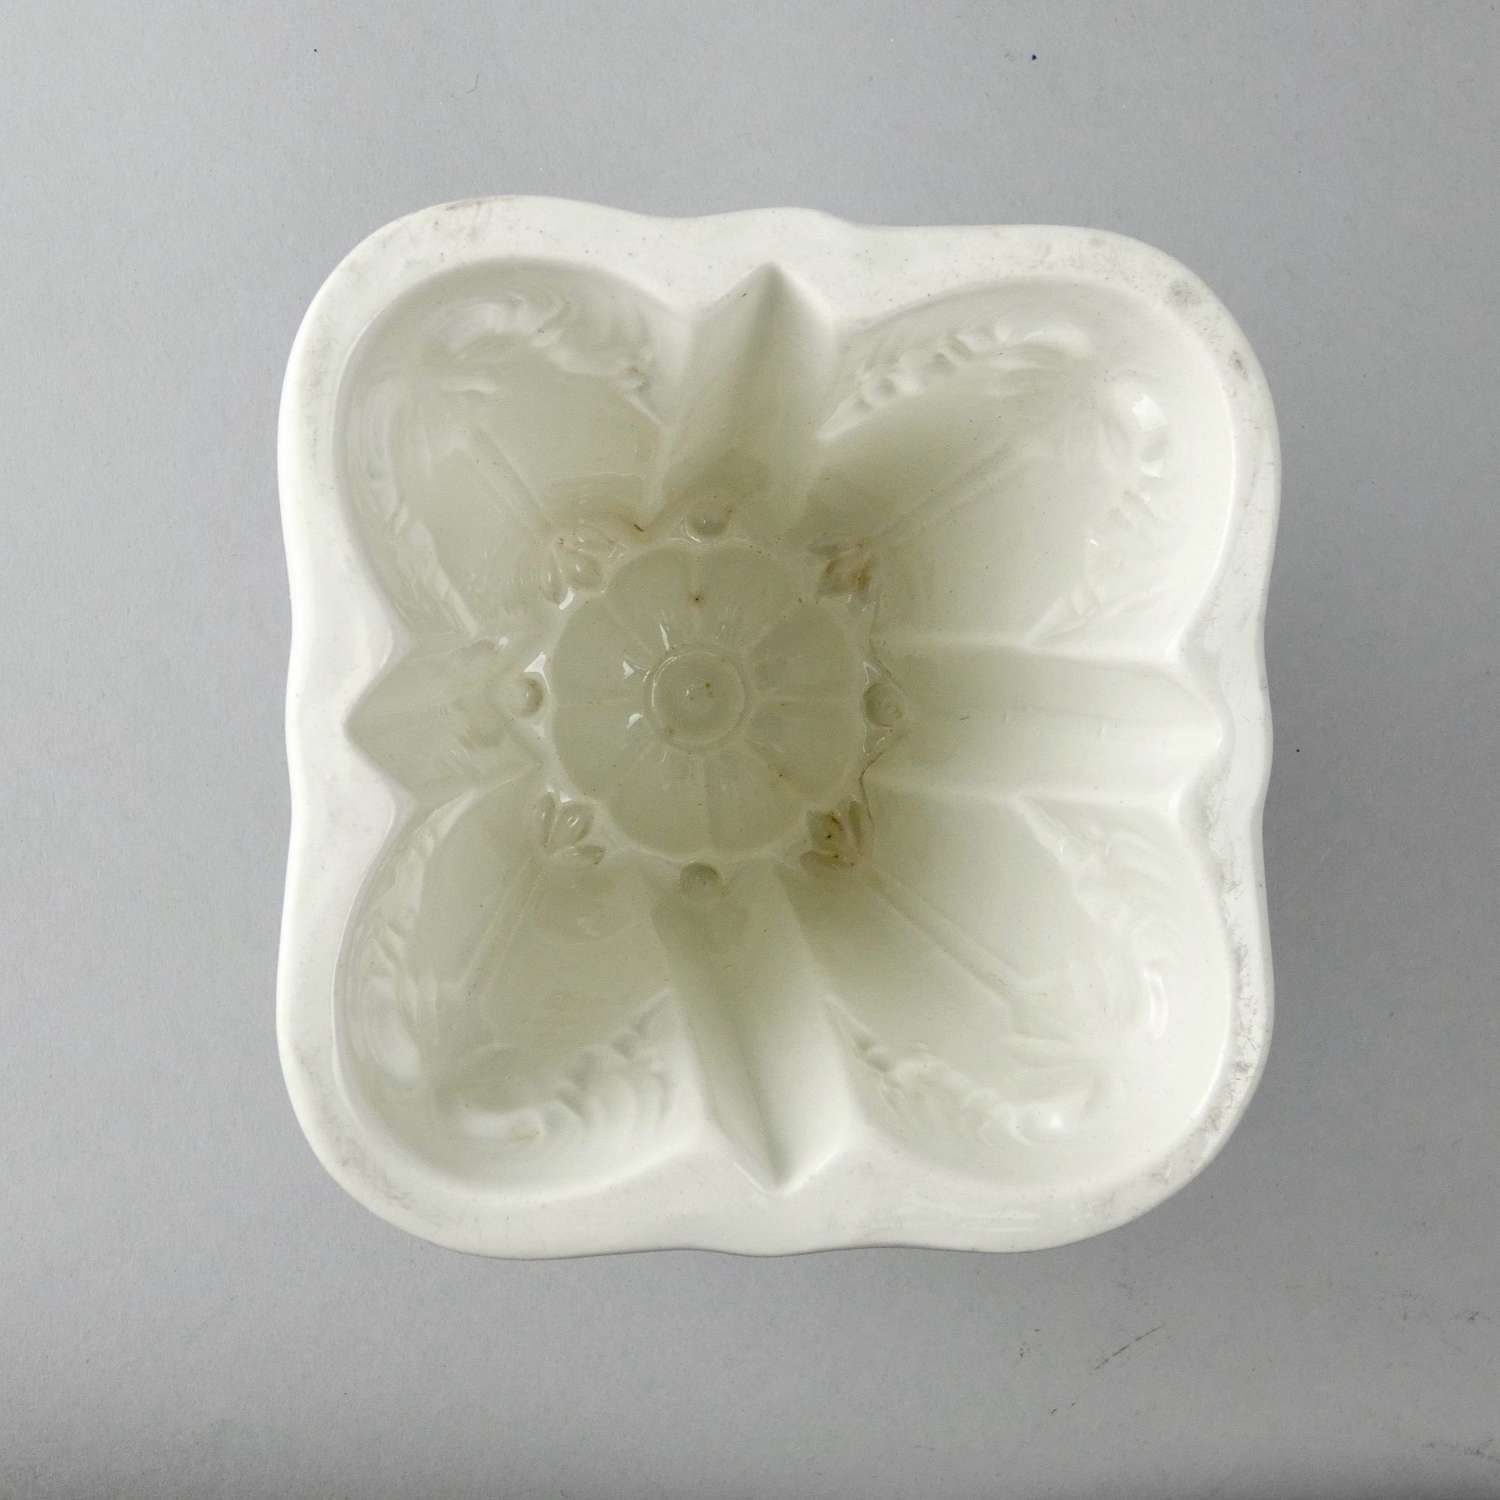 Unusual shaped ironstone mould